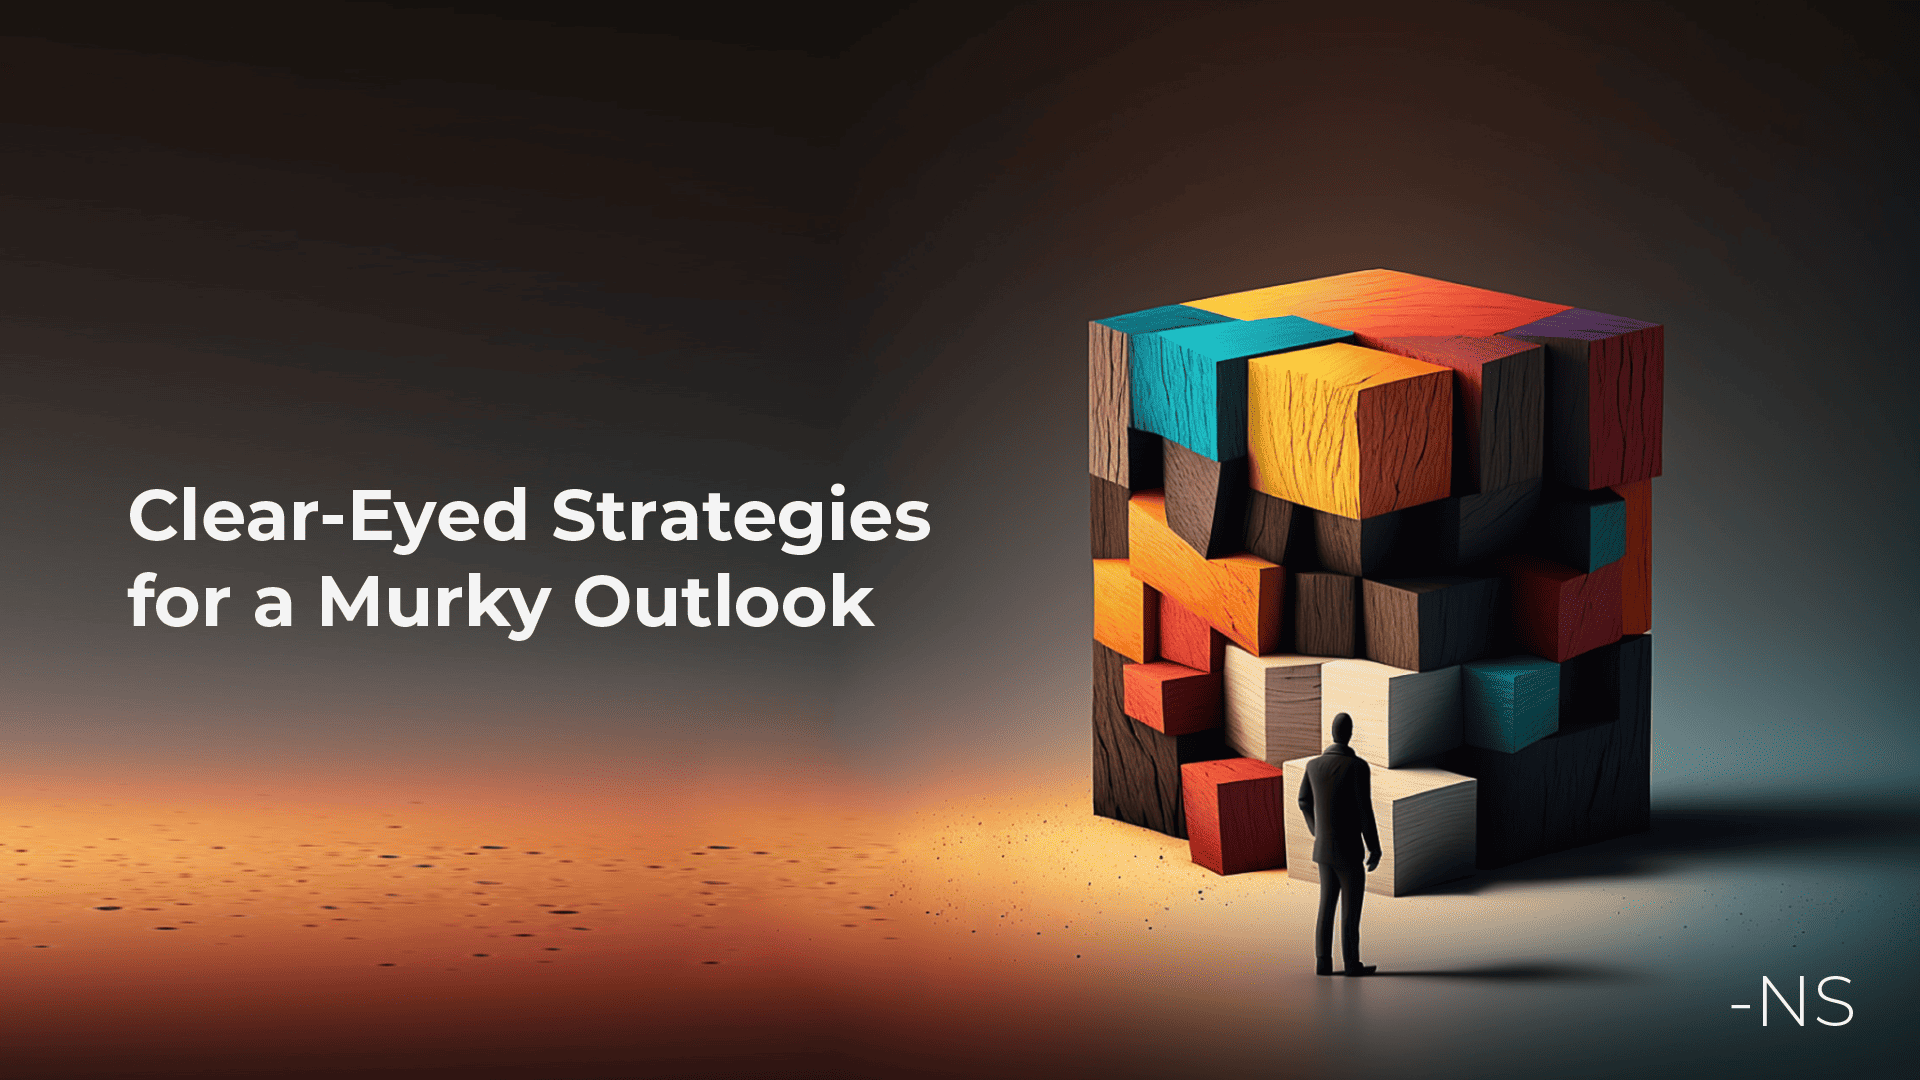 Clear-Eyed Strategies for a Murky Outlook